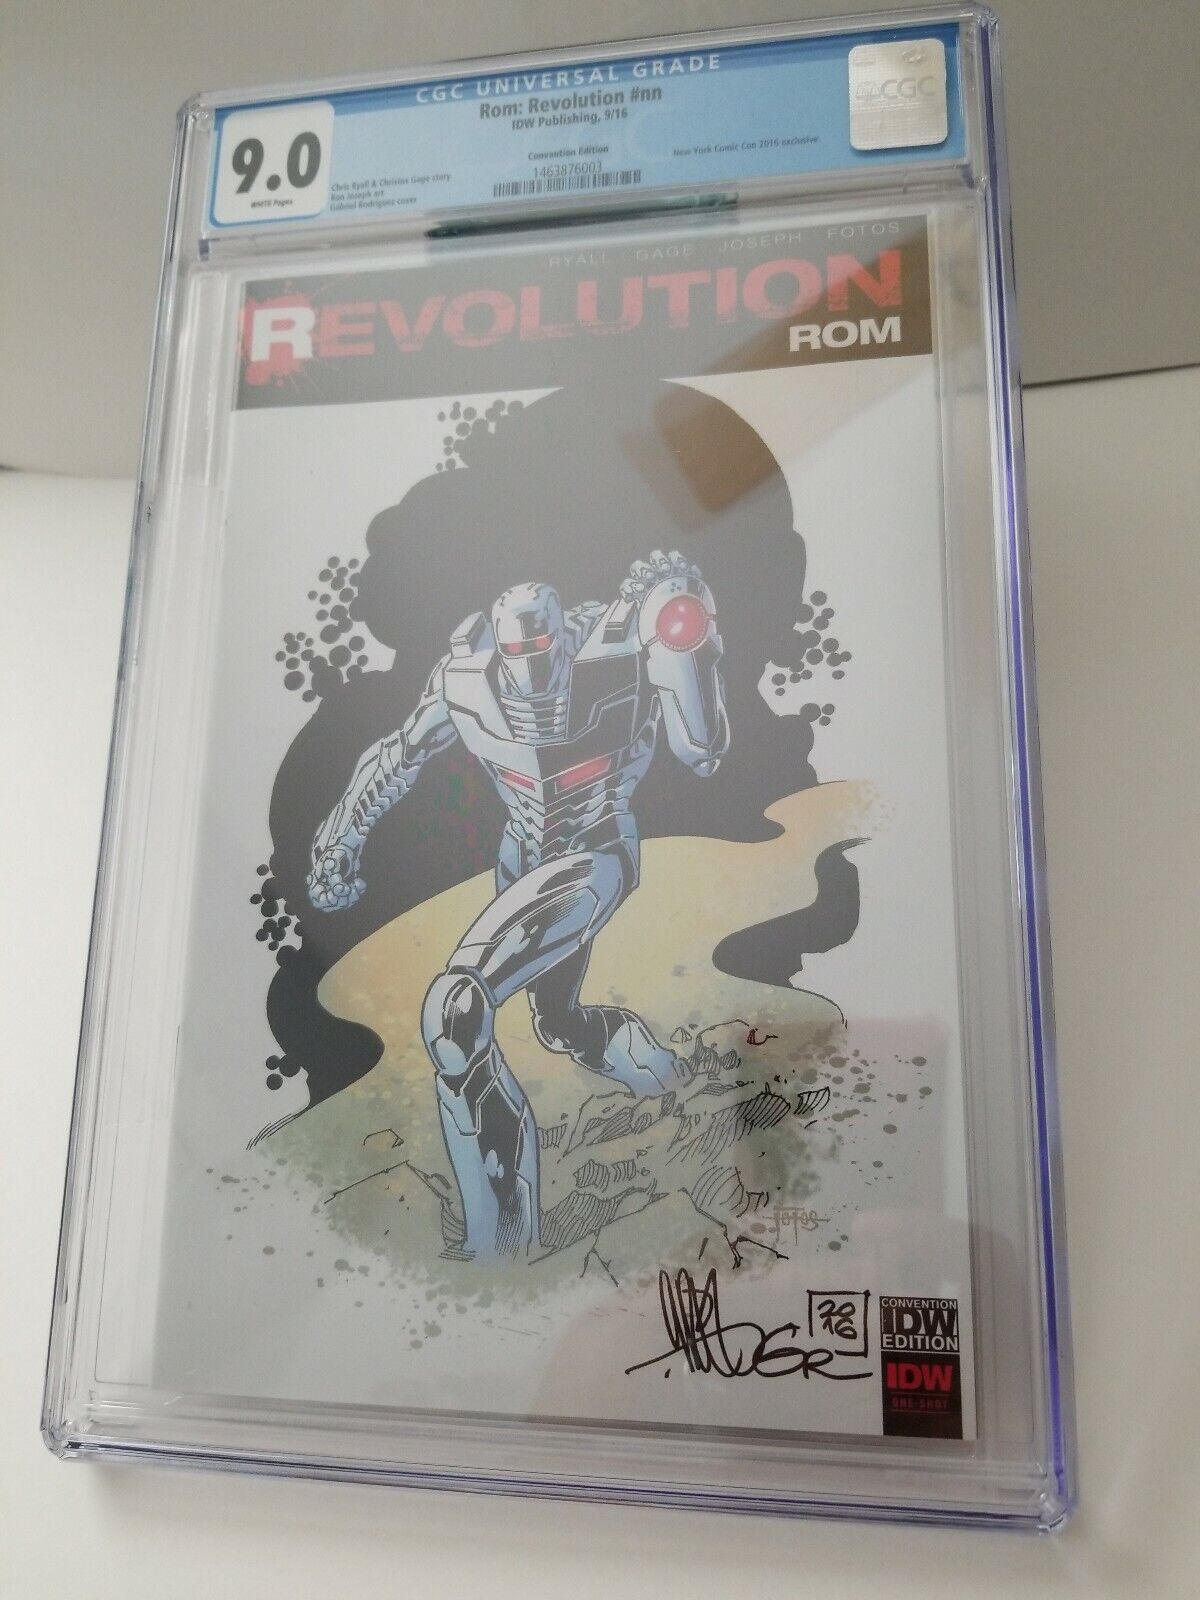 IDW NYCC 16 Exclusive Rom Revolution CGC 9.0 Gabriel Rodriguez Cover